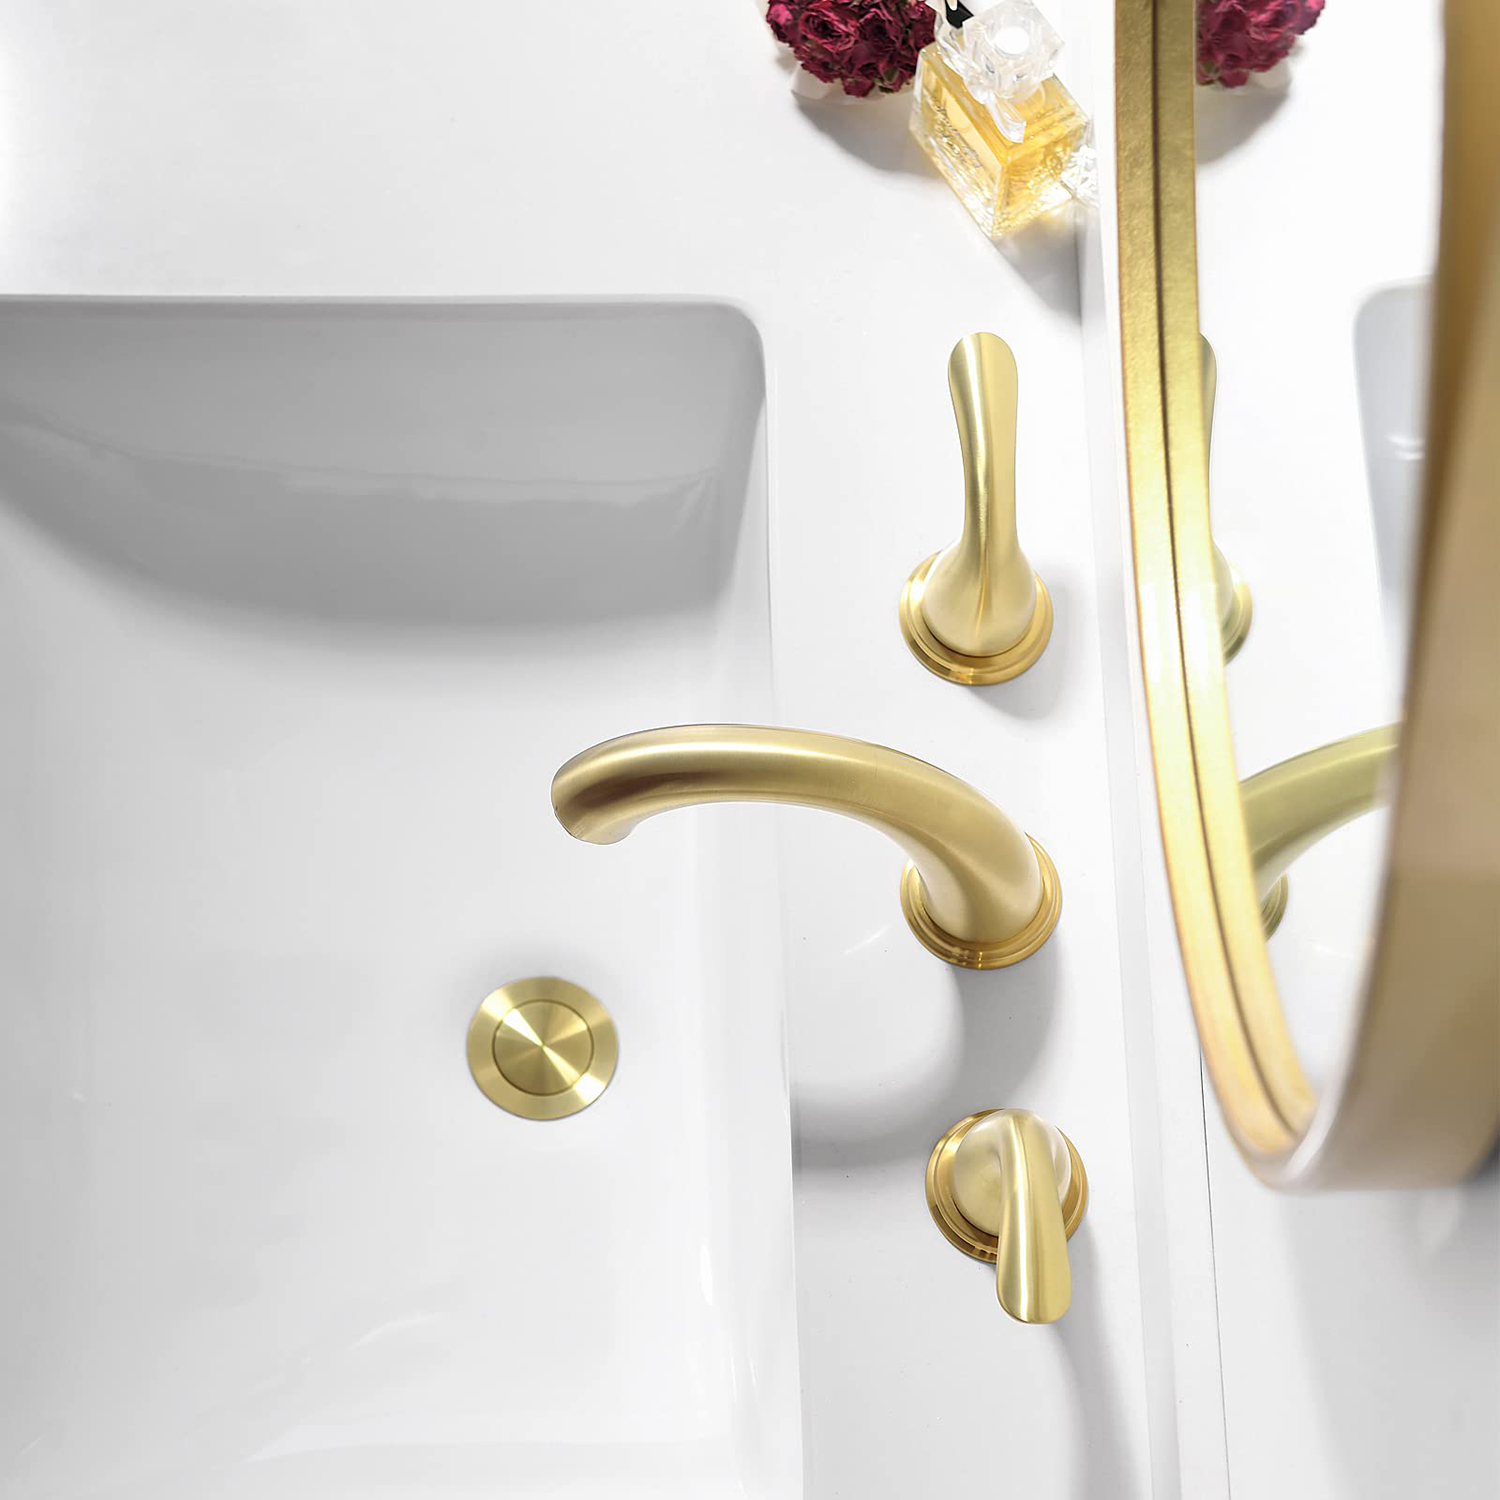 Aquacubic Widespread Brushed Gold Fancy American Style Dual Handle Three Hole Bathroom Basin Tap Lavatory Faucet